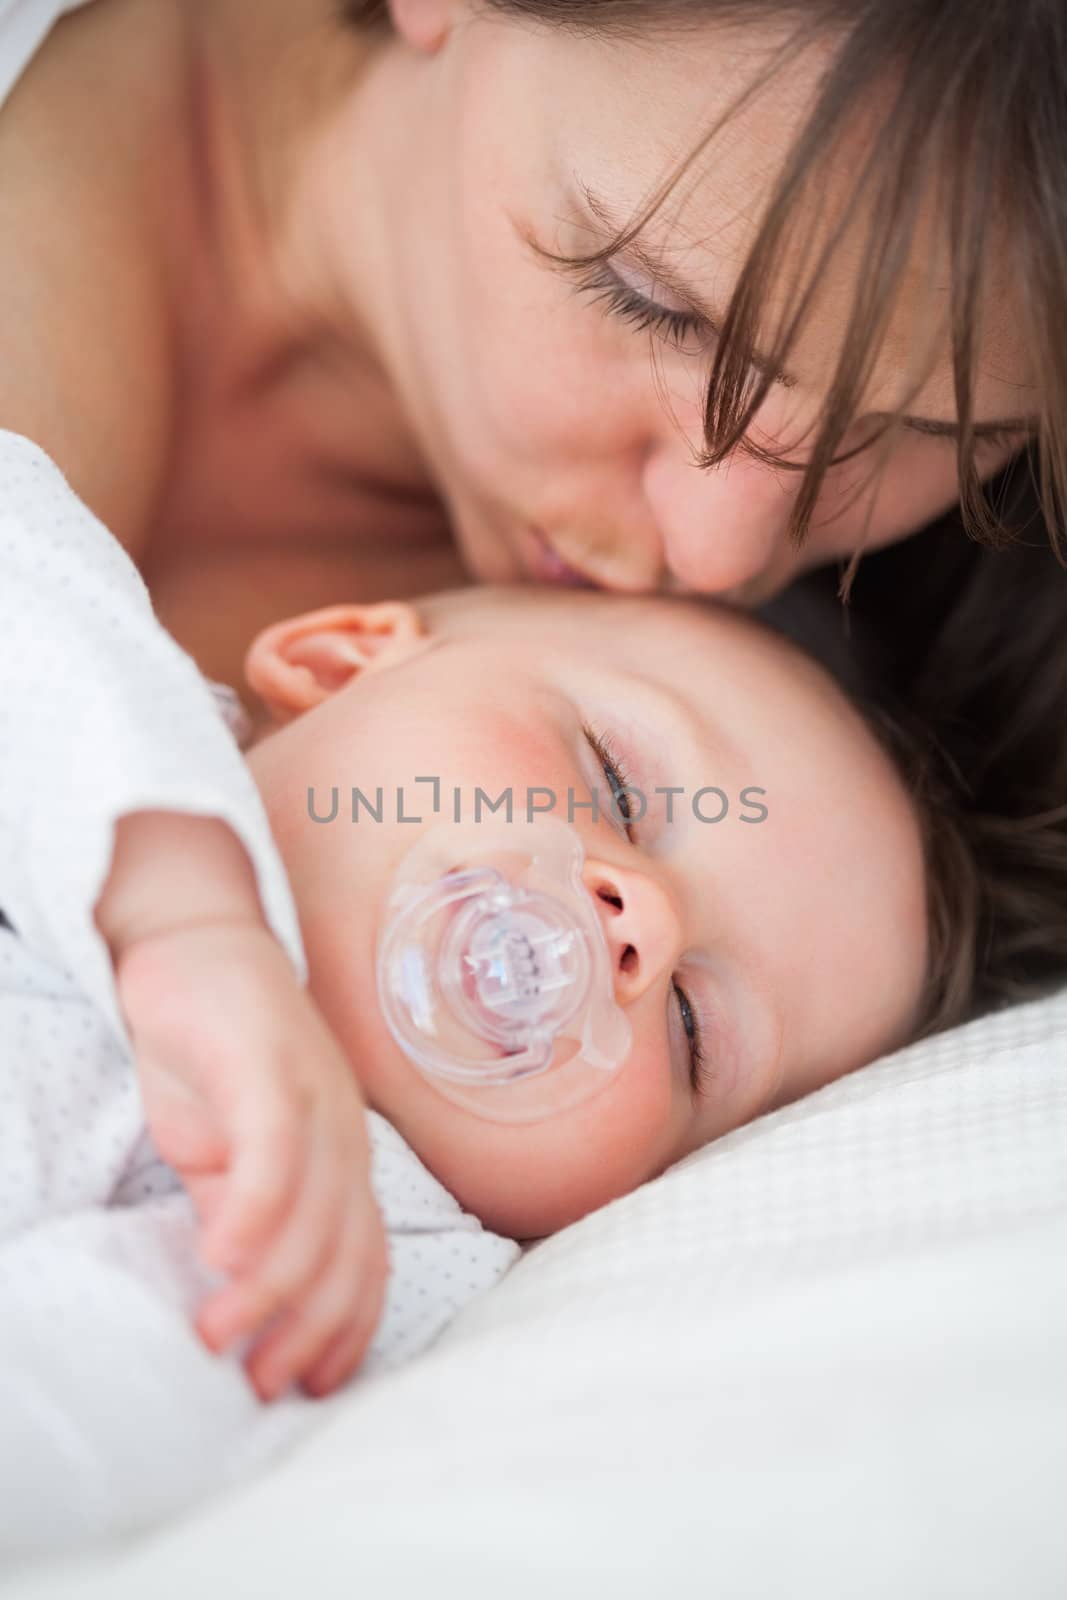 Brunette woman kissing the head of her baby indoors